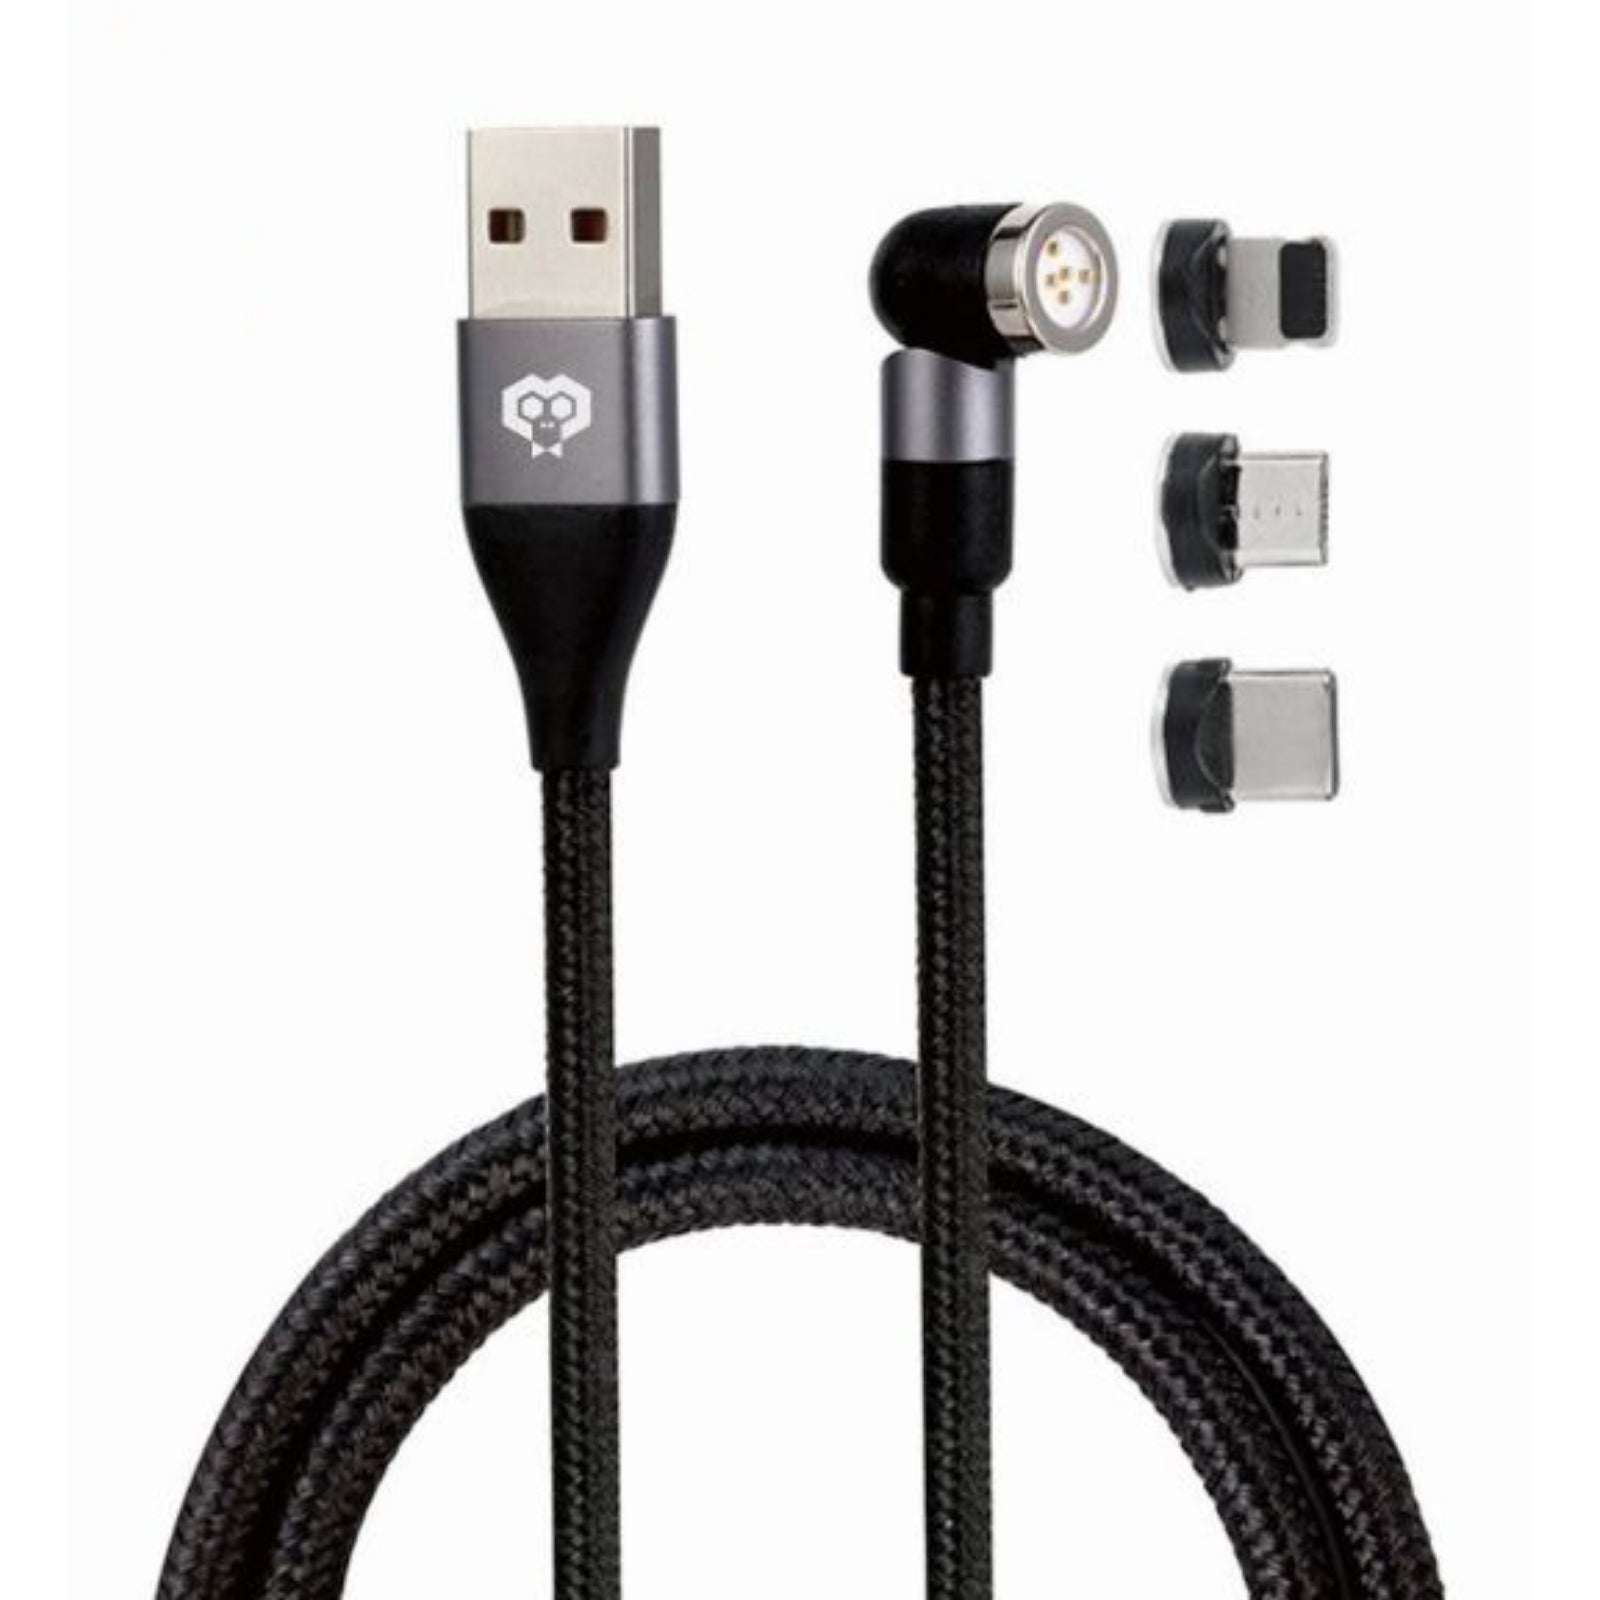 MonkeyTEC 3 in 1 magnetic charging cable with data transfer 540° rotatable for iPhone / Micro USB / USB C PC-MGT-PD3